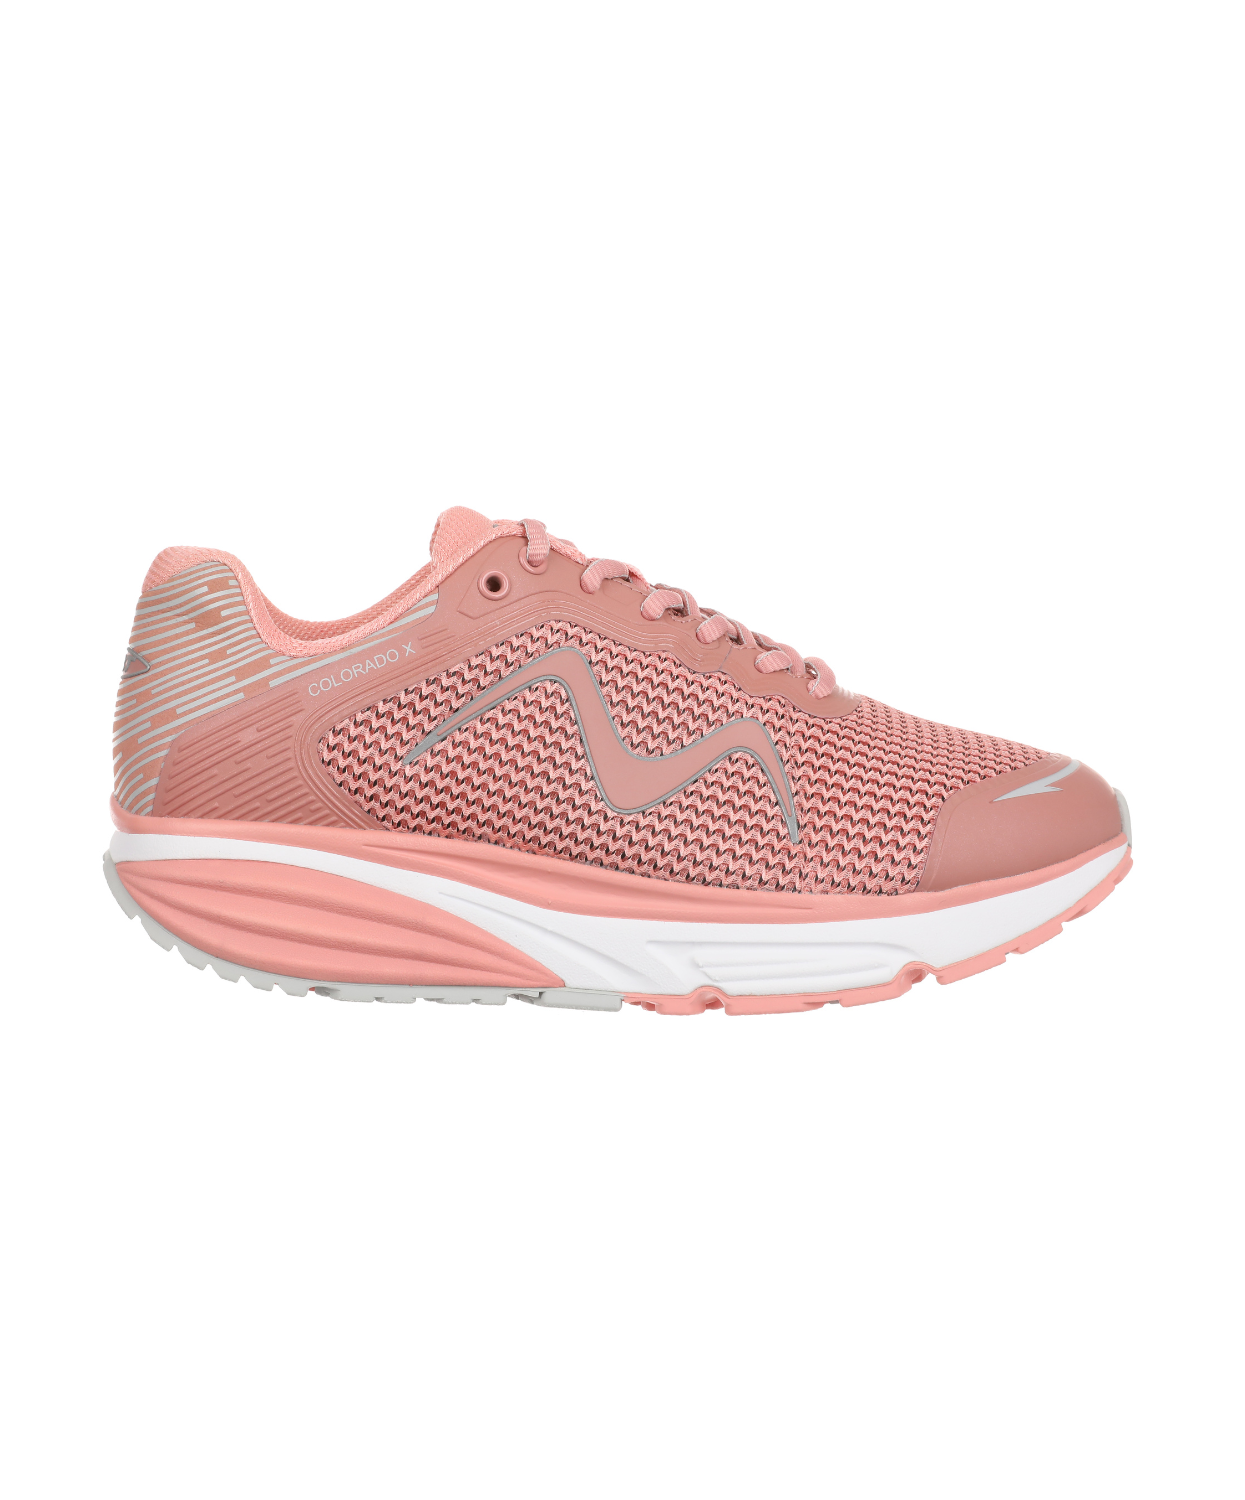 MBT Colorado X Coral Womens Sneakers